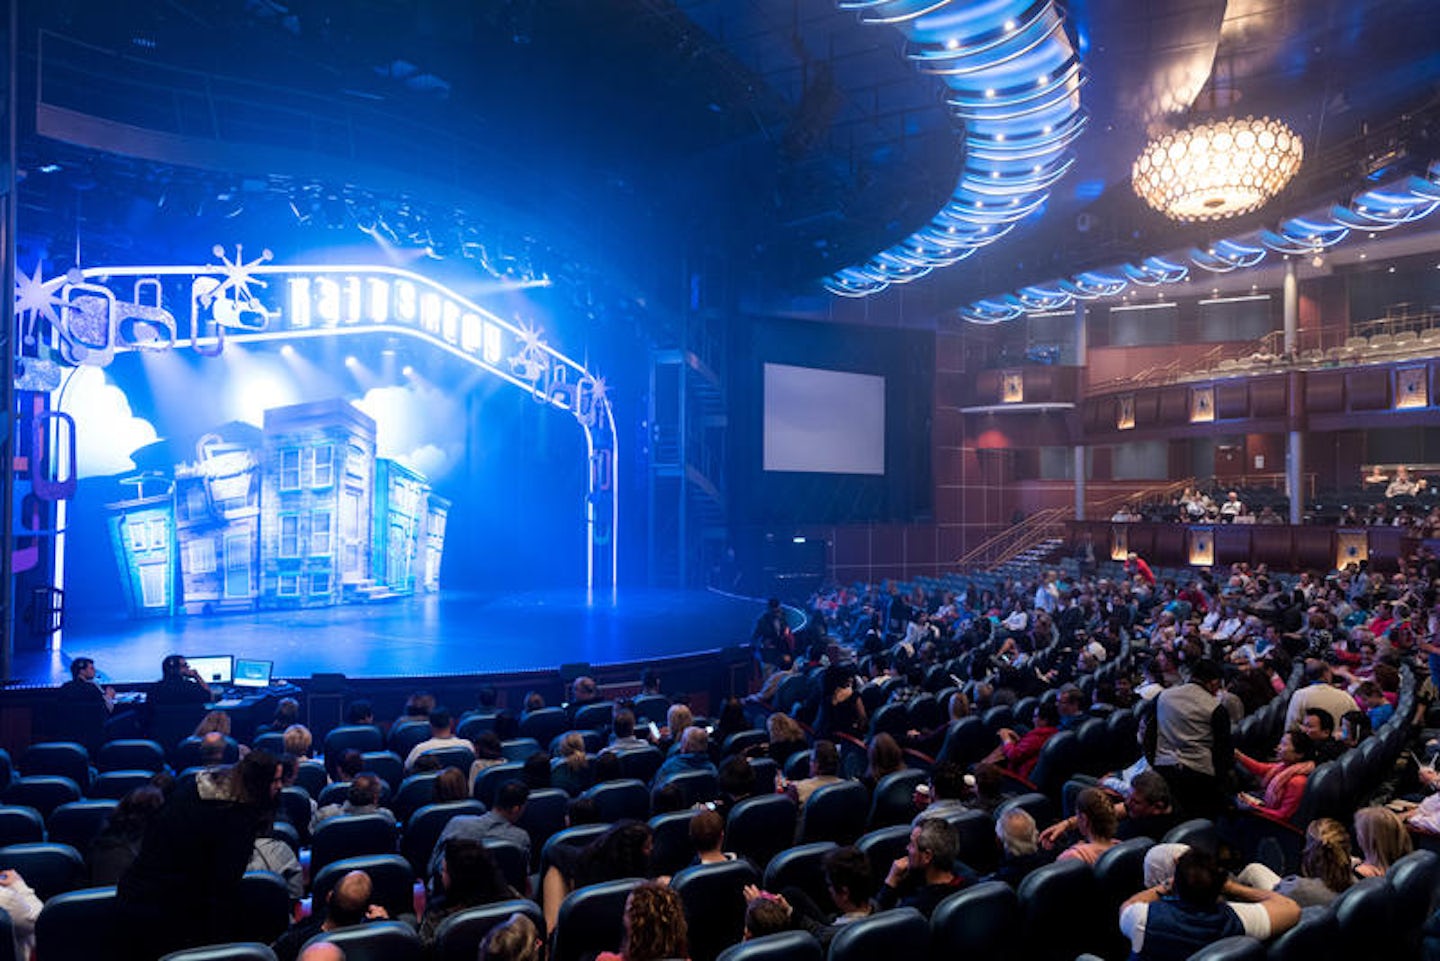 Royal Theater on Symphony of the Seas